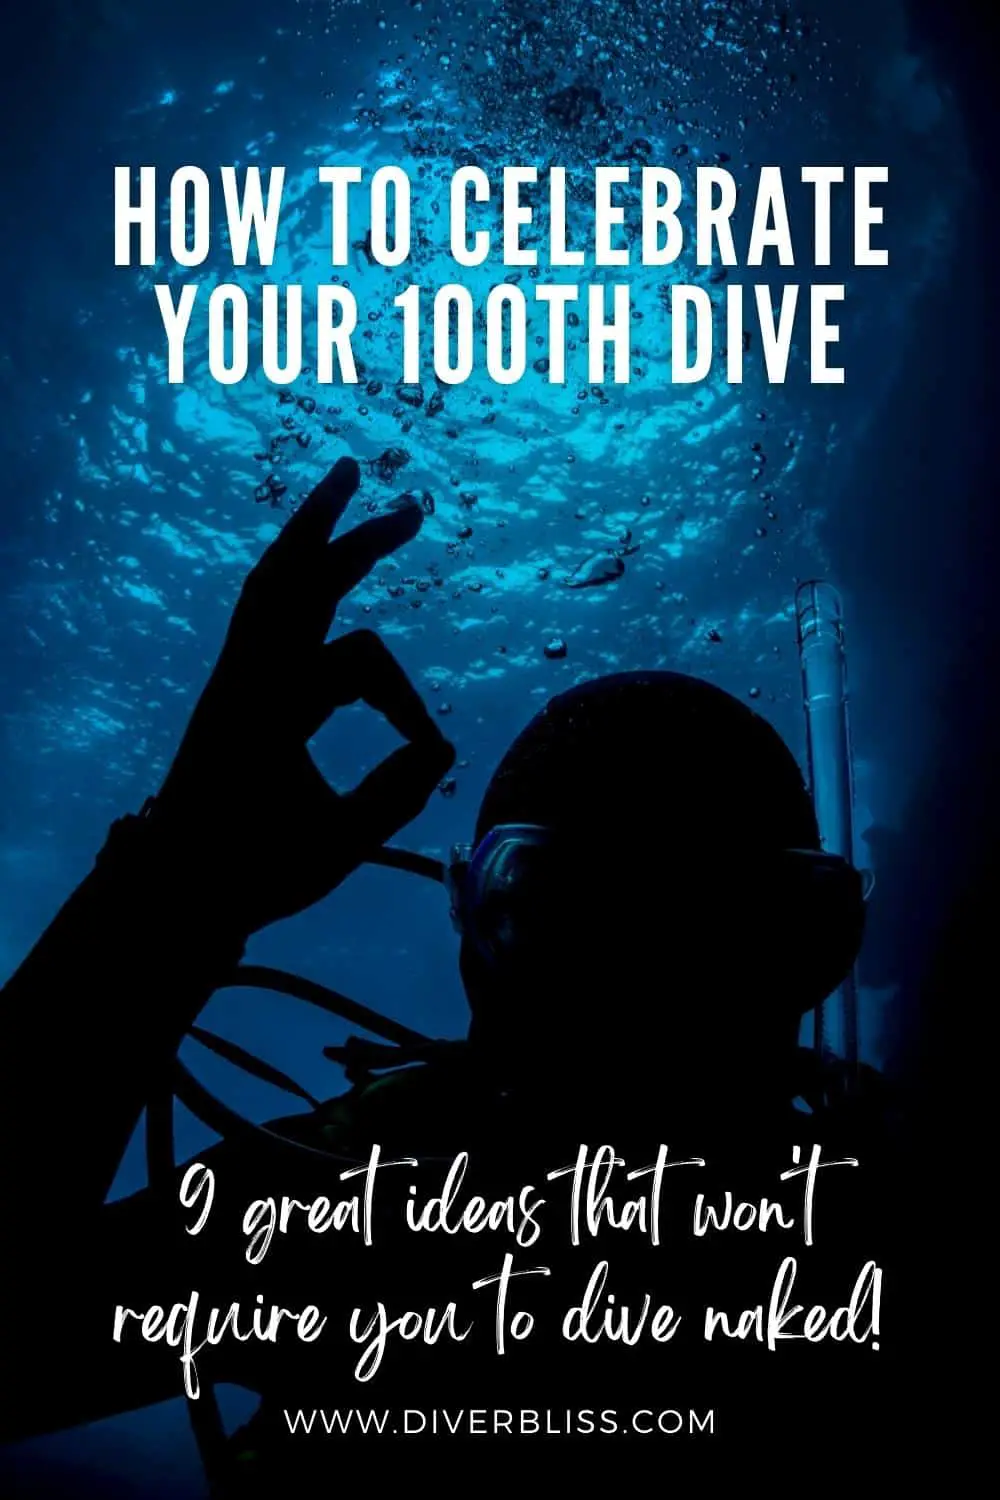 how to celebrate your 100th dive, 9 great ideas that won't require you to dive naked!